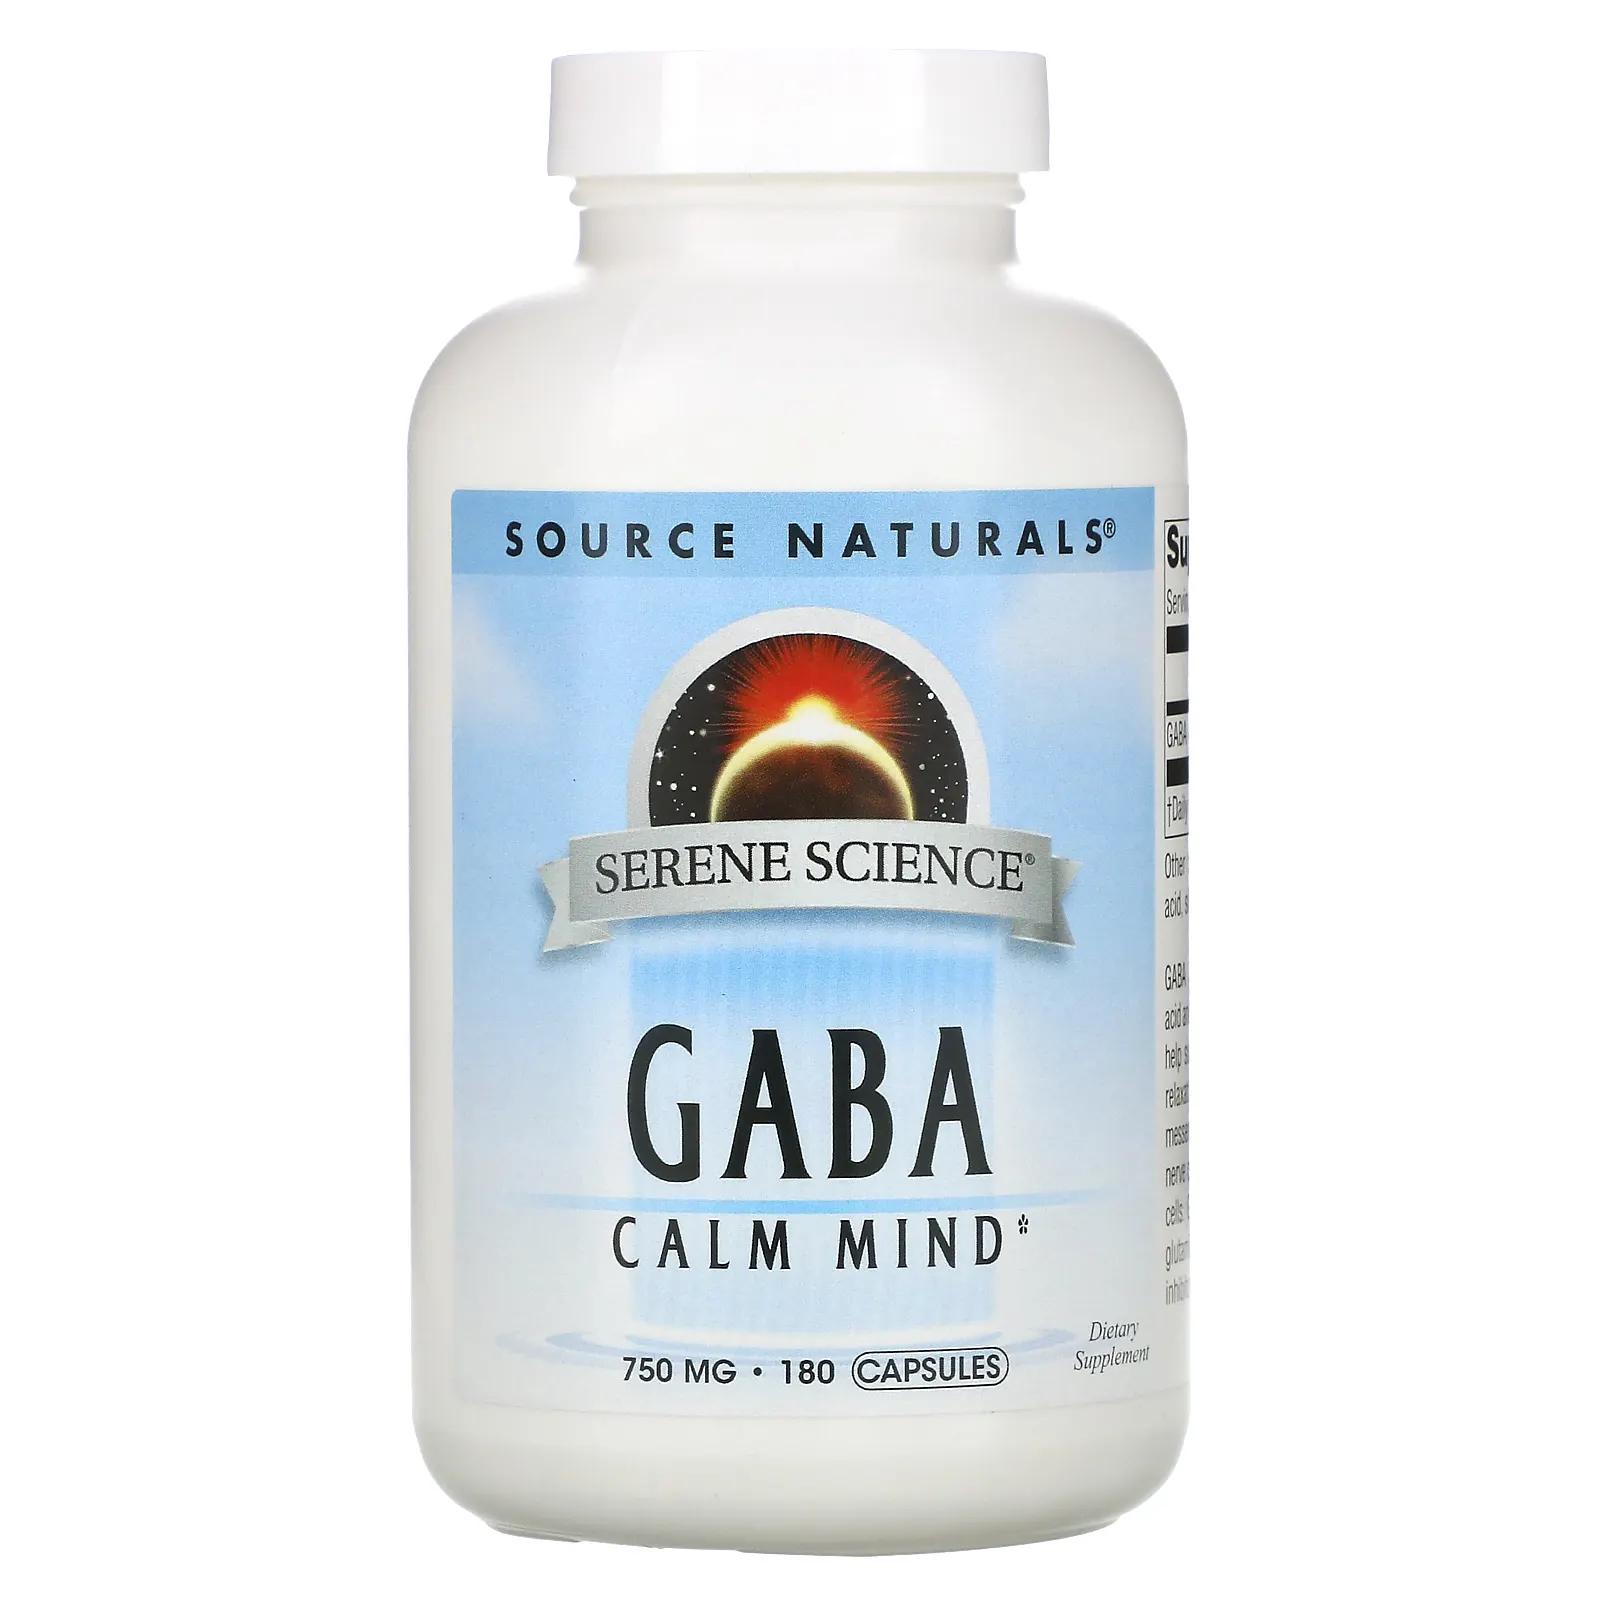 Source Naturals ГАМК 750 мг 180 капсул source naturals gaba calm mind гамк 750 мг 180 таблеток